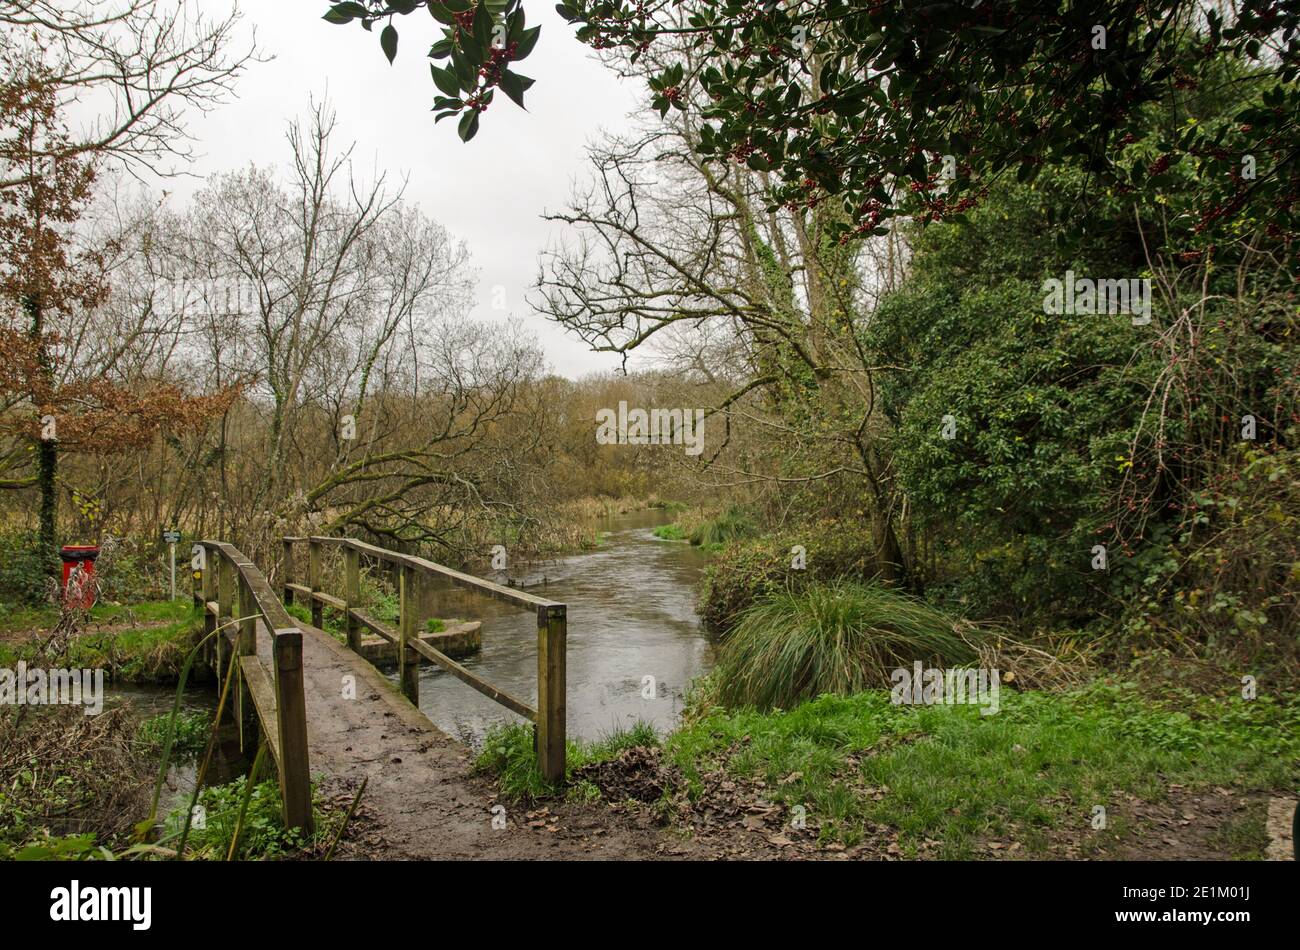 Footbridge over a bend in the River Itchen in the village of Itchen Stoke, Hampshire on a cloudy autumn day. Stock Photo